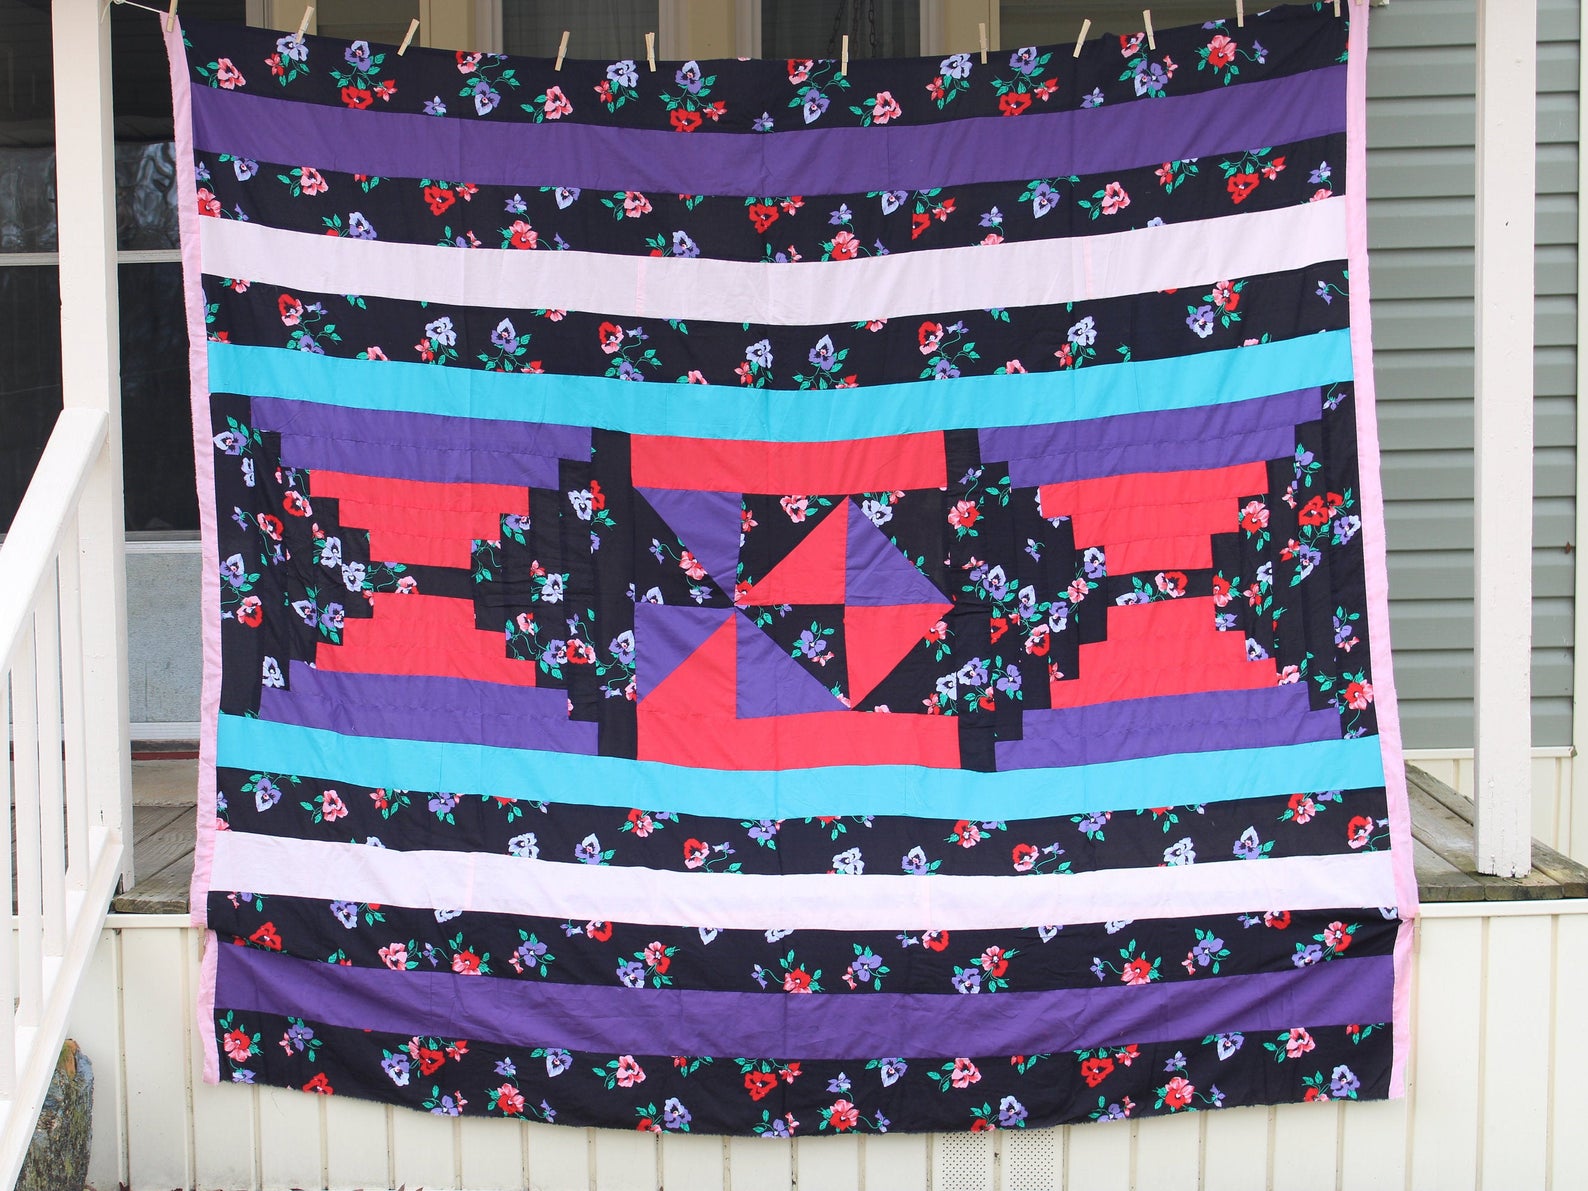 Gee's Bend quilt by Lue Ida